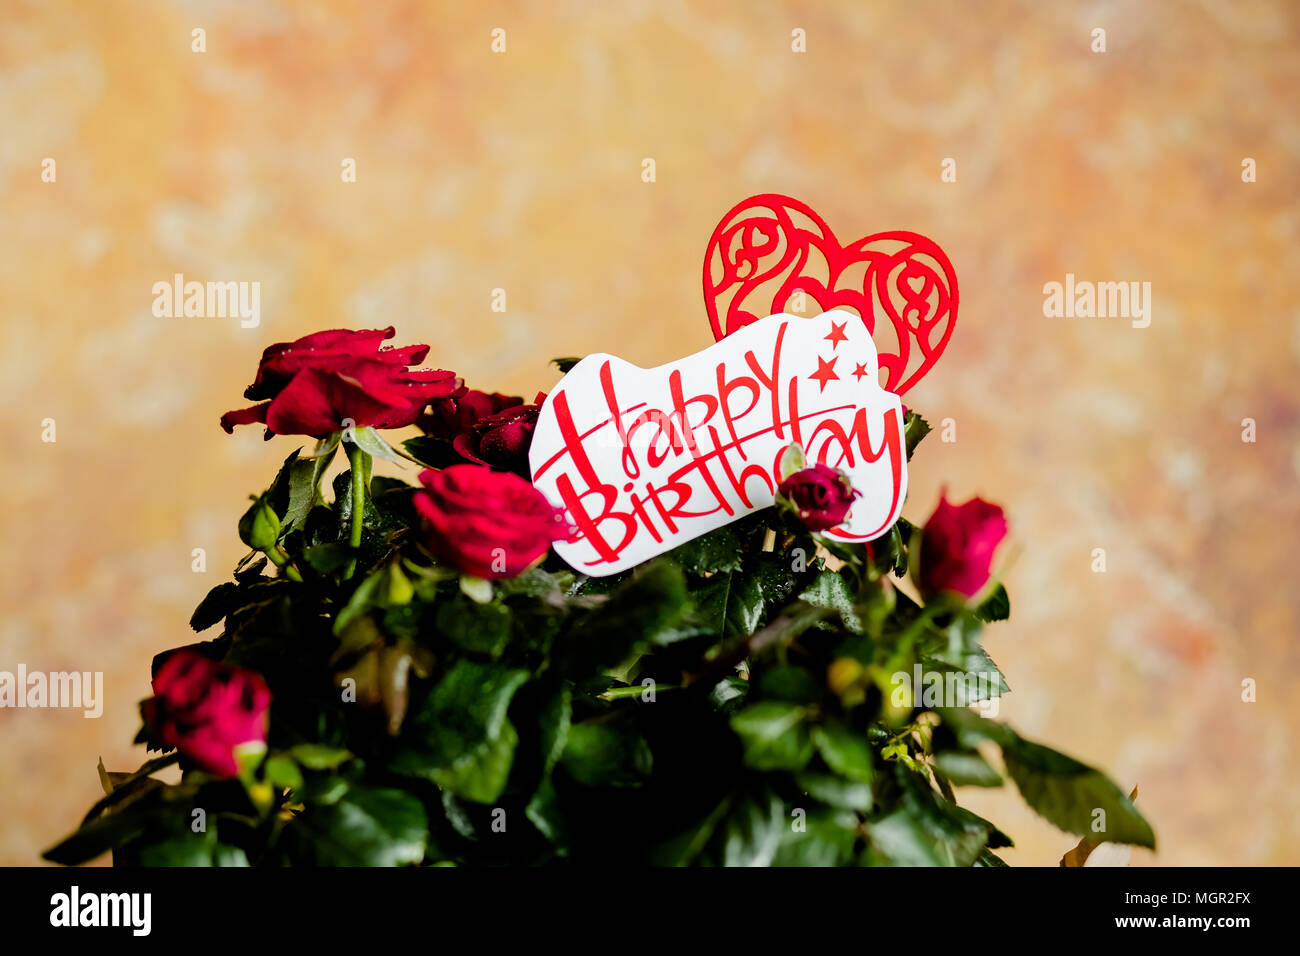 Red roses flowers with red heart on wooden background.birthday card with beautiful red rose.red flowers and message Happy birthday, Stock Photo